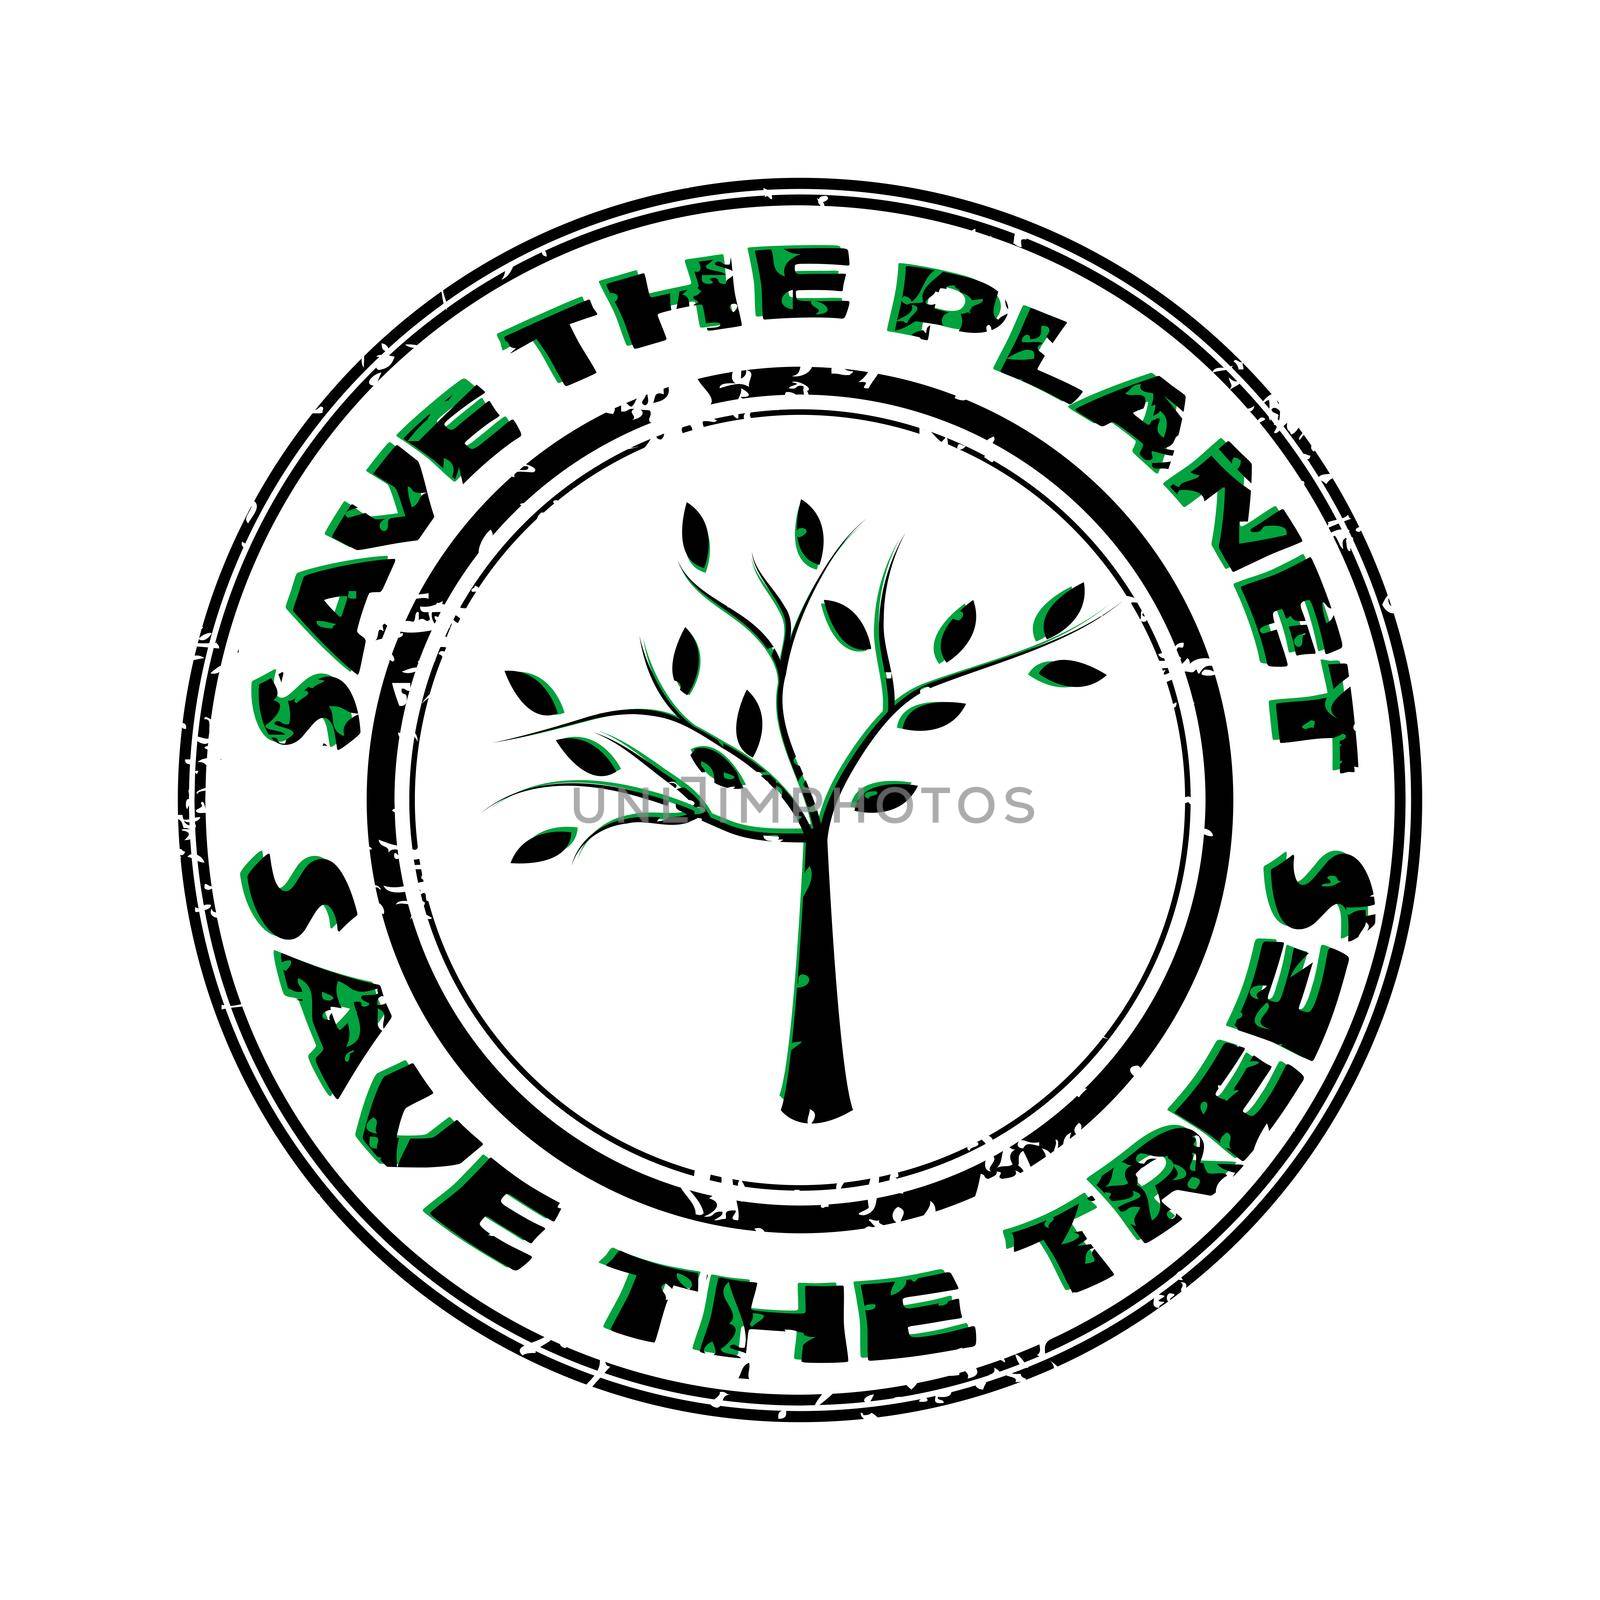 Save the planet and save the trees rubber stamp by hibrida13